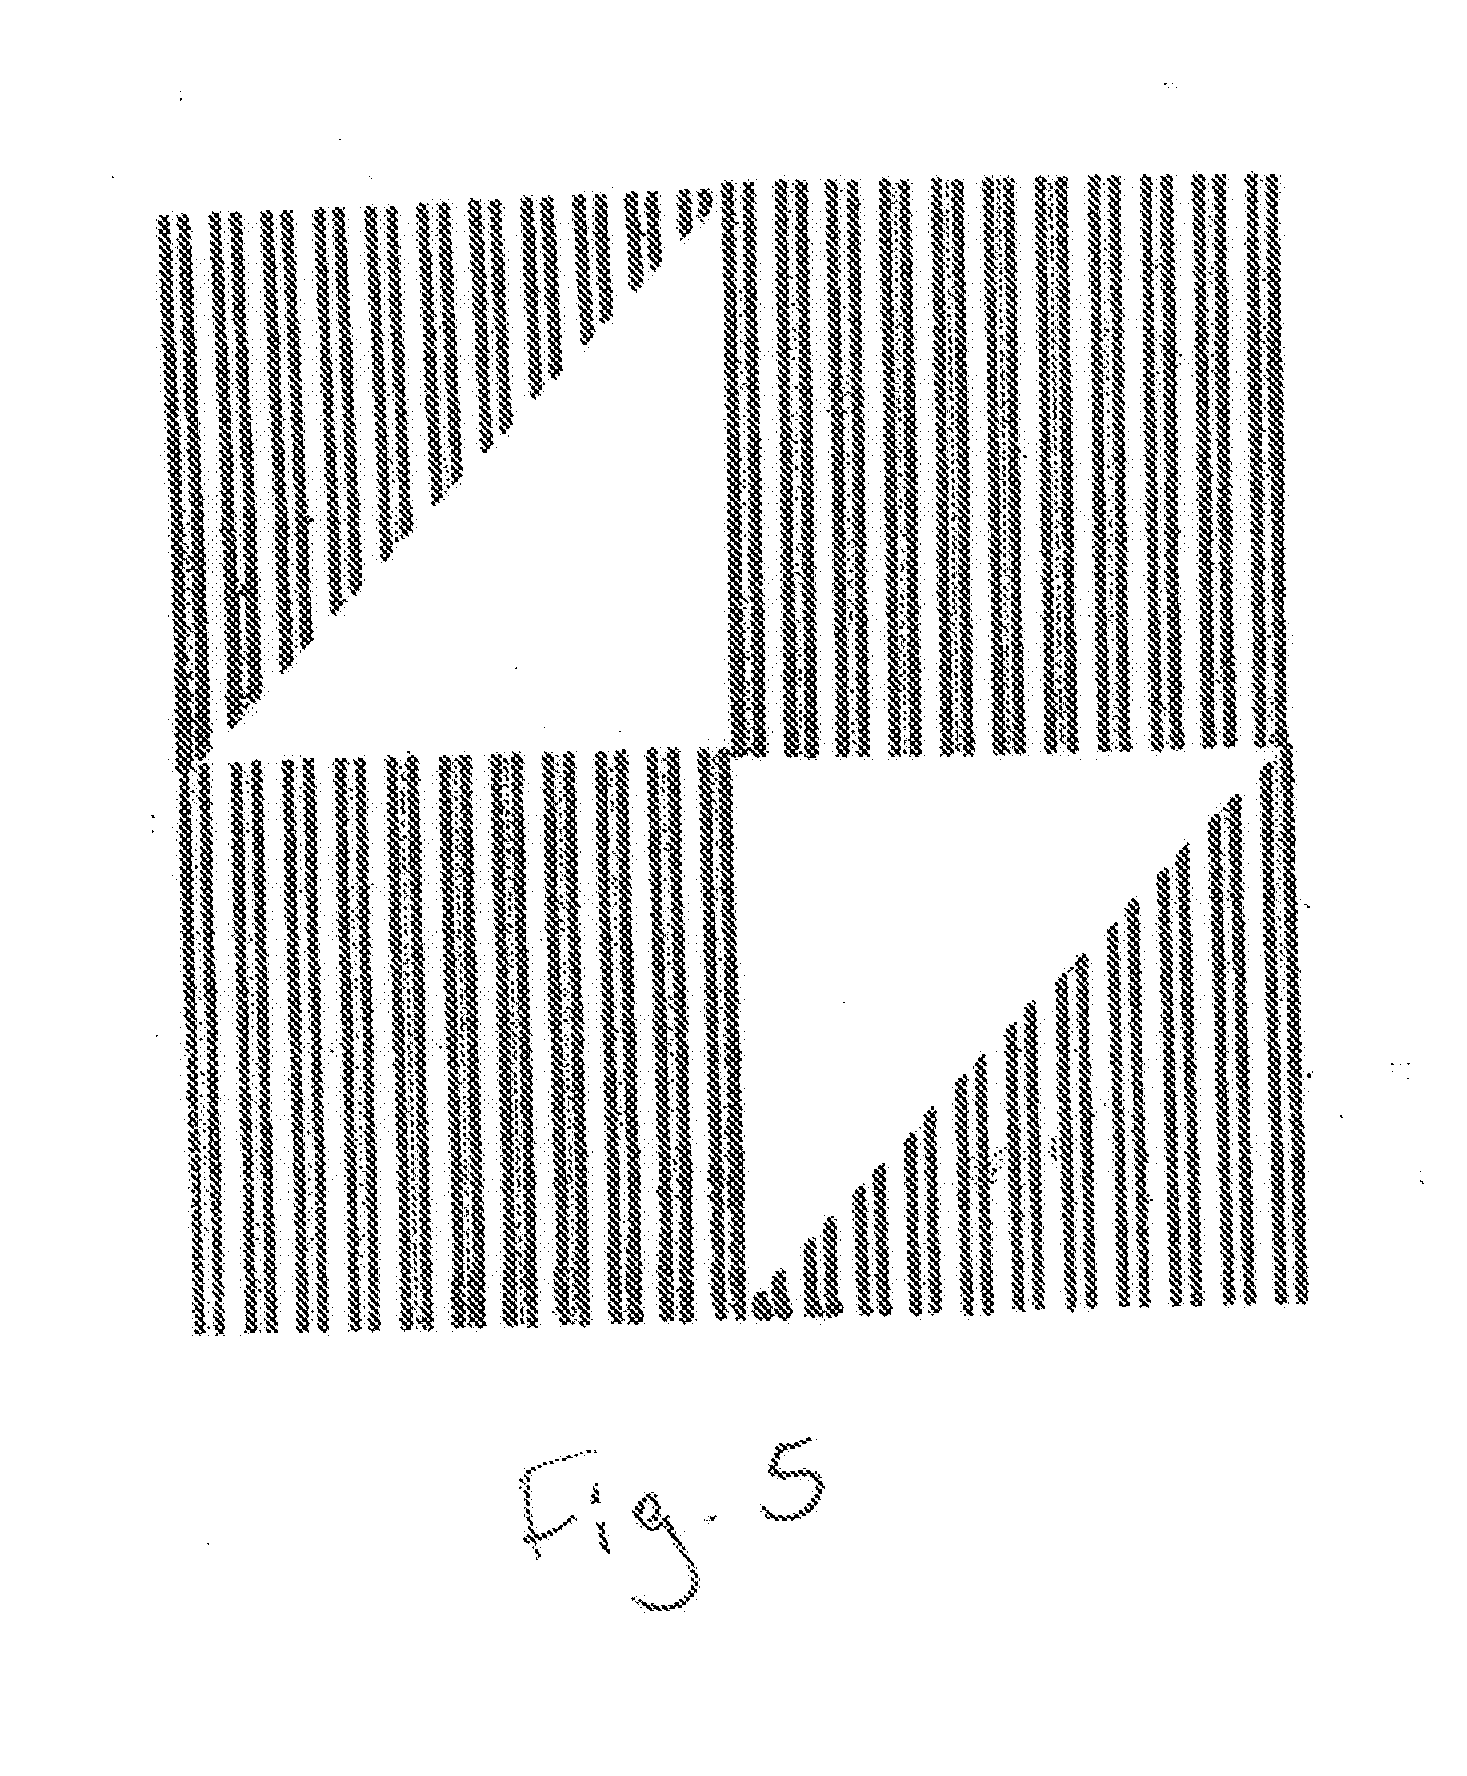 Method and System of Creating a Quilted Product